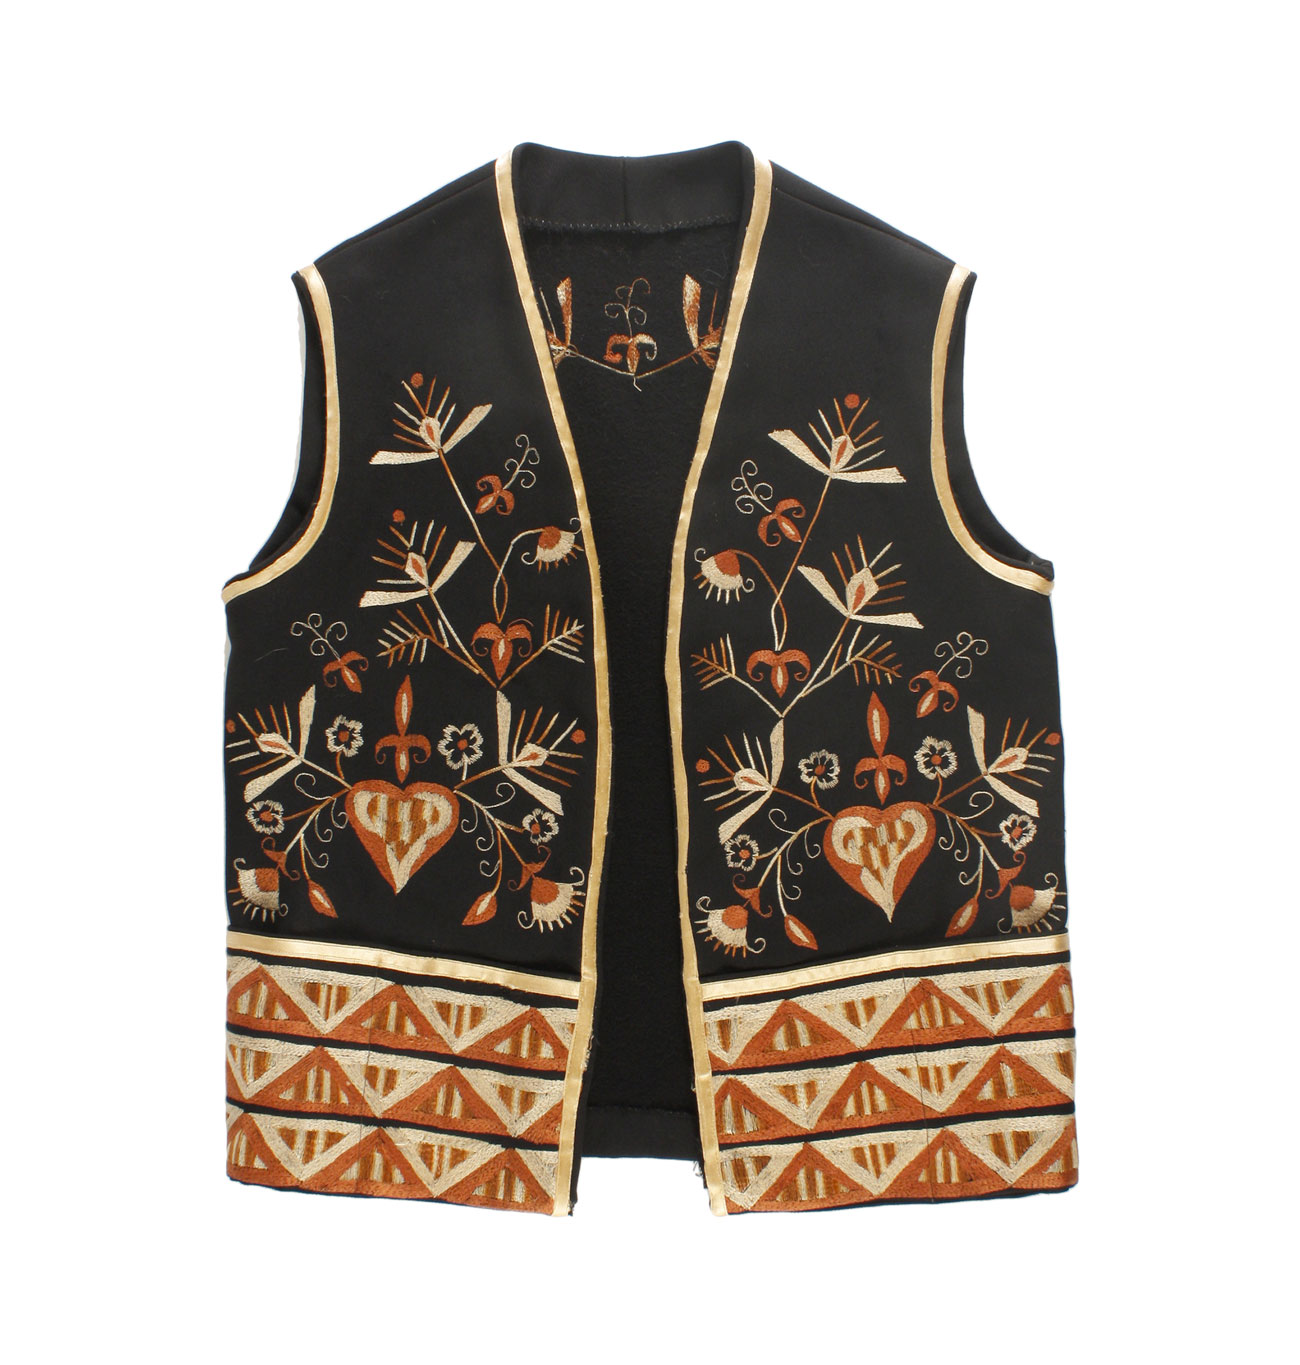 Hungarian vests with embroidery